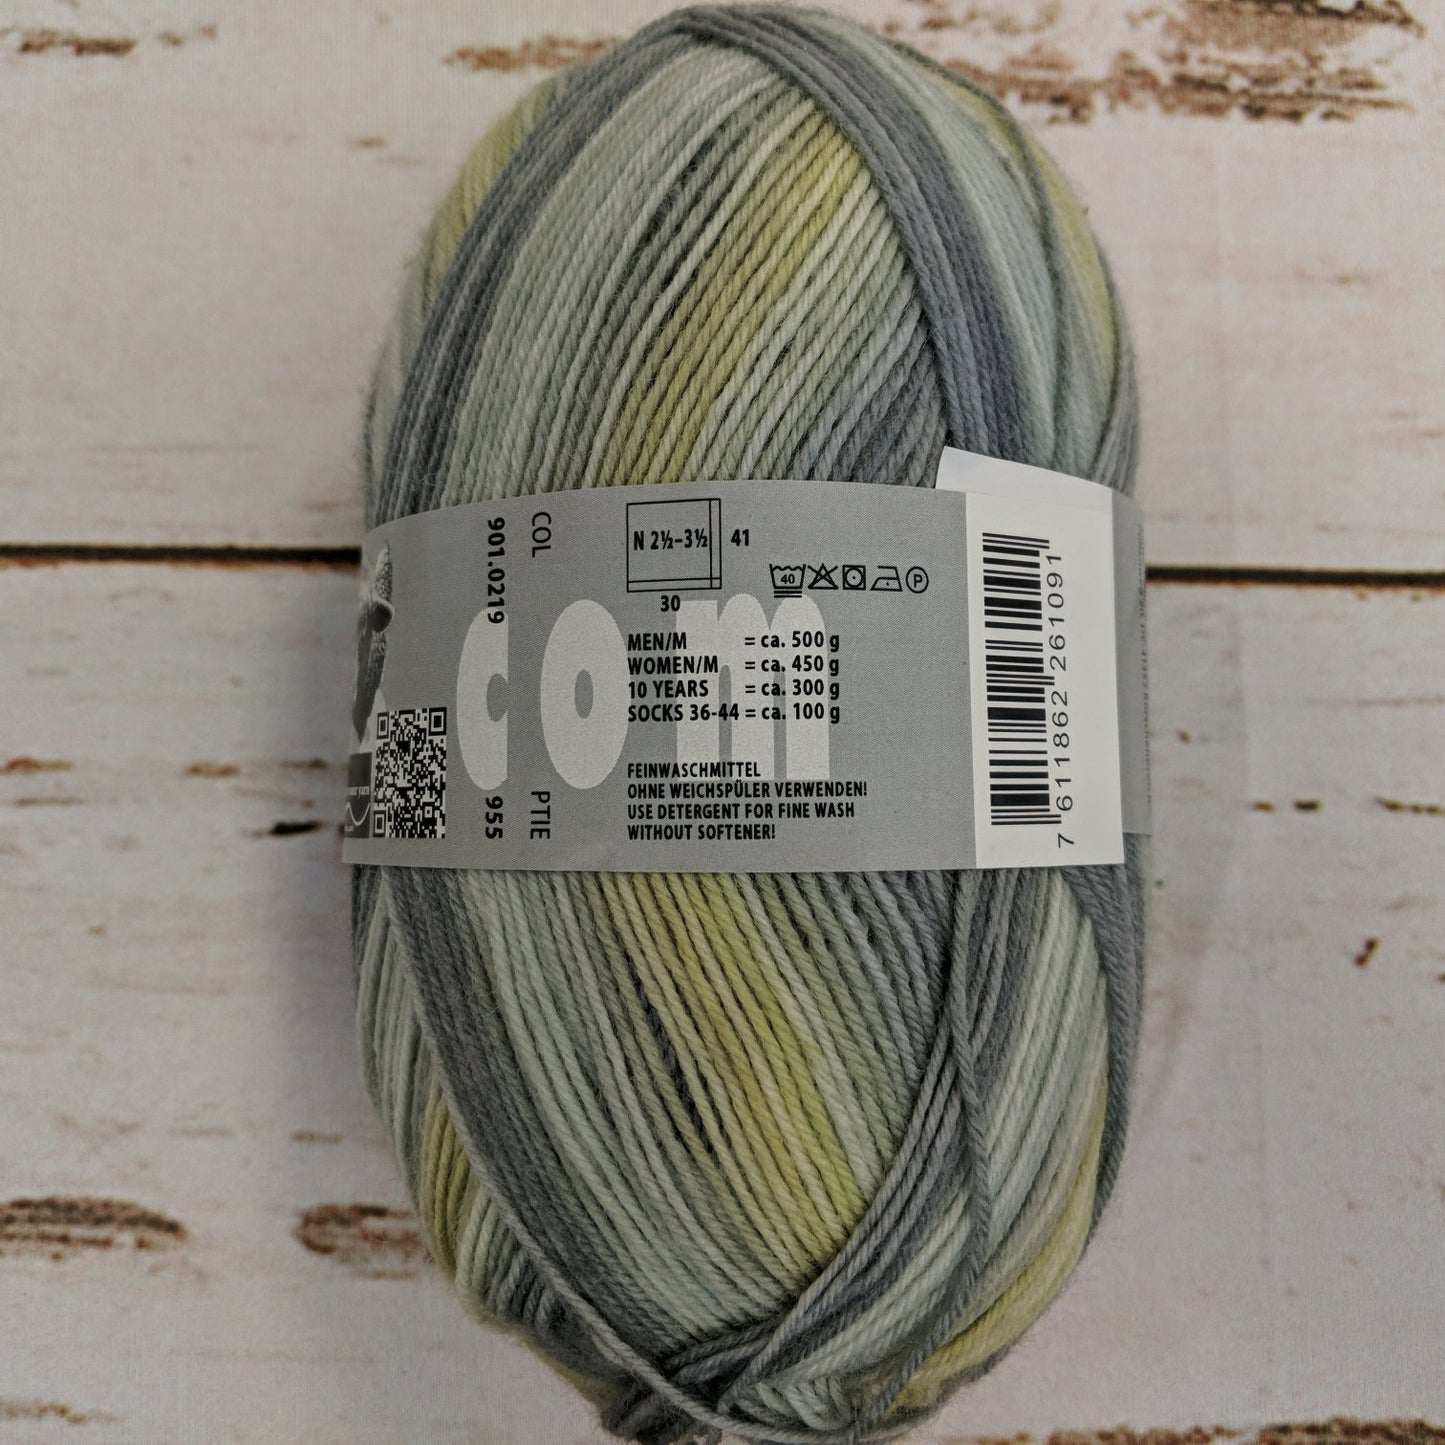 Laine | Lang Yarns | Twin Soxx